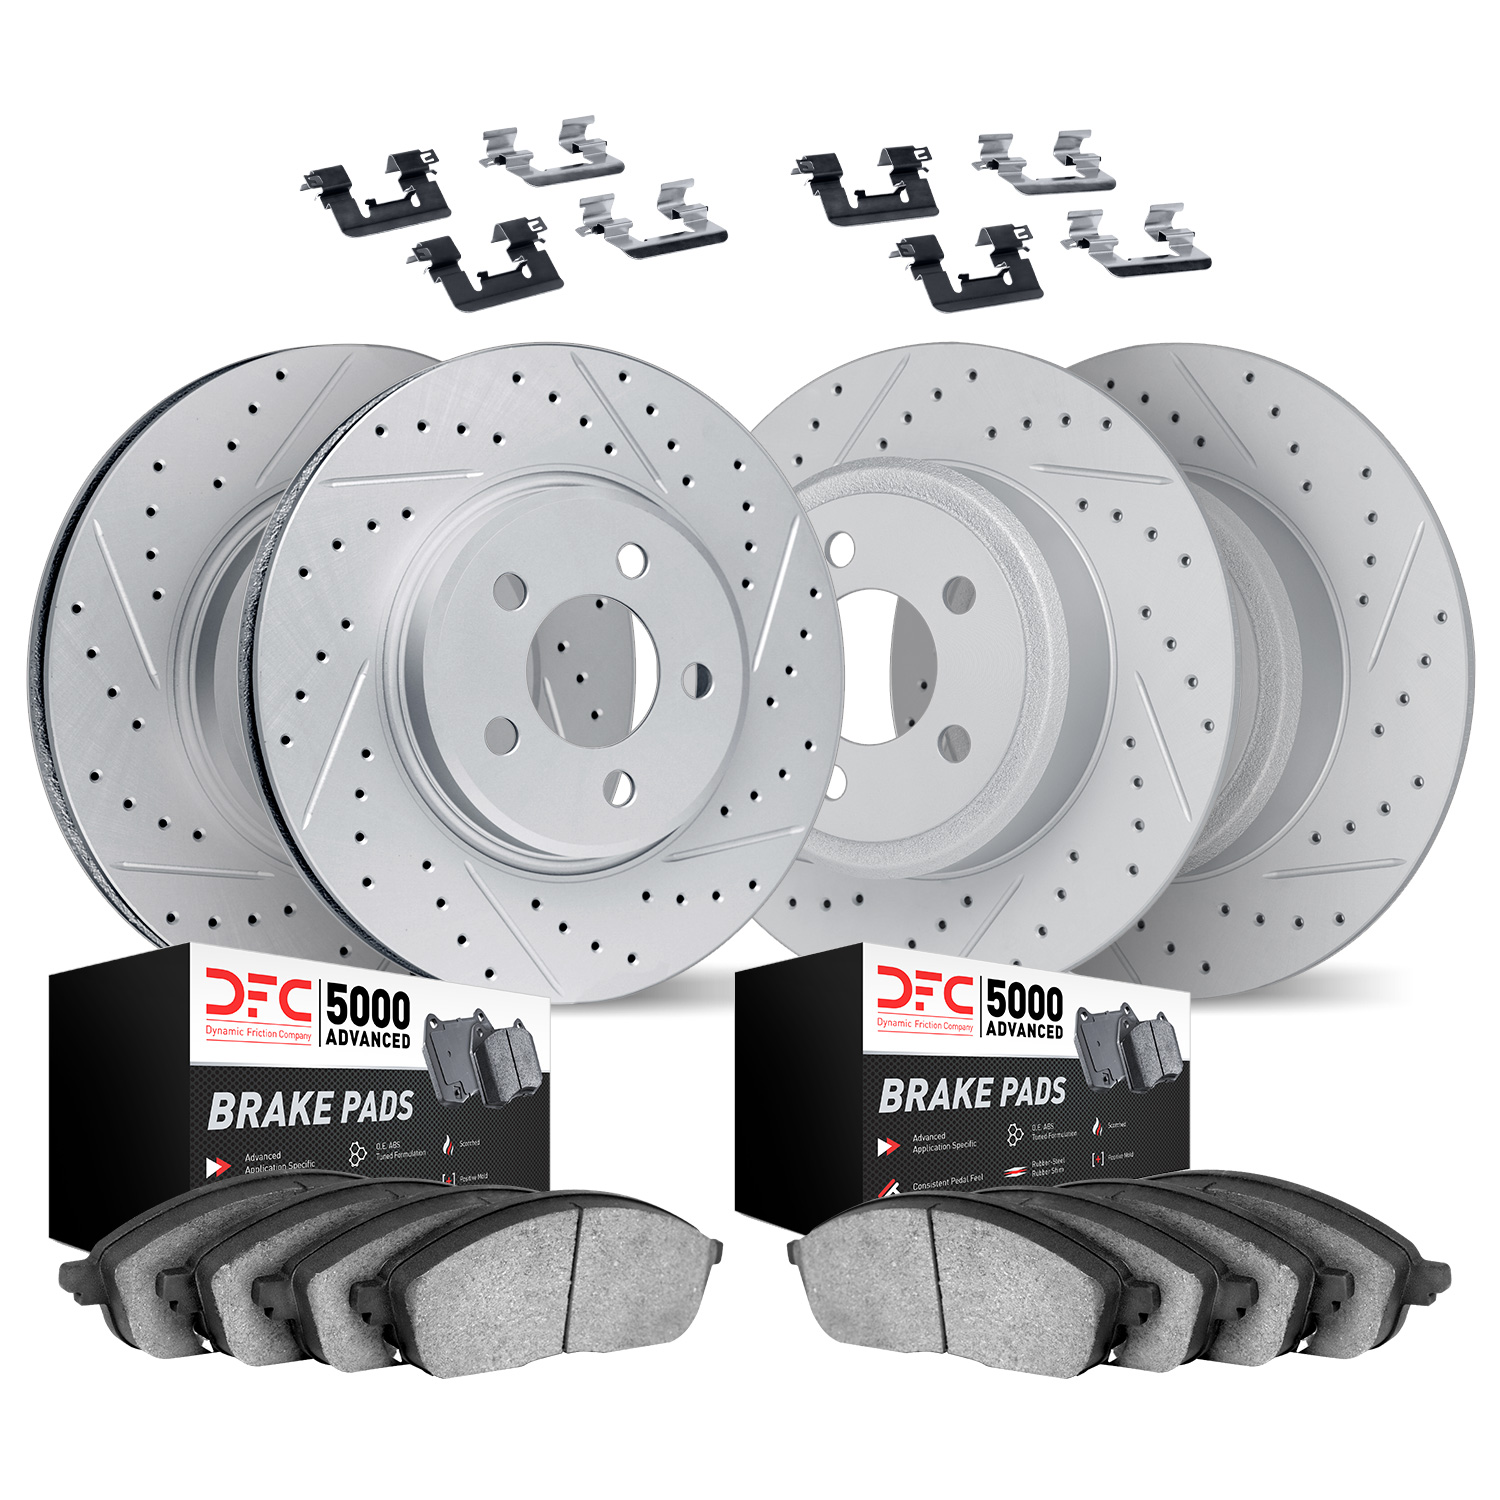 2514-59042 Geoperformance Drilled/Slotted Rotors w/5000 Advanced Brake Pads Kit & Hardware, Fits Select Acura/Honda, Position: F